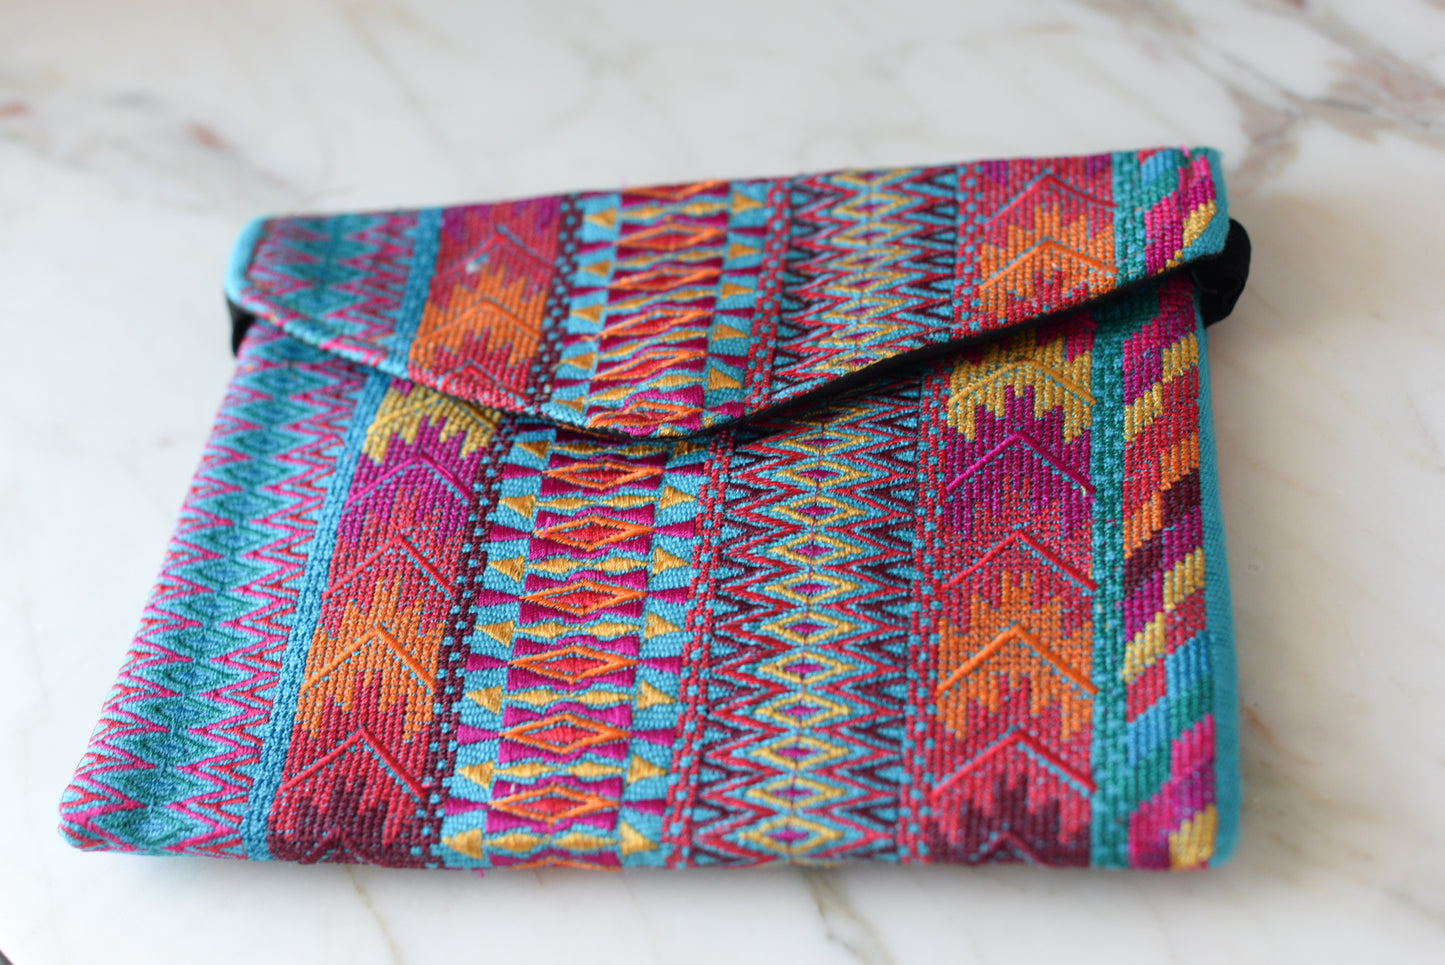 Colorful Mayan Clutch from Chiapas - The Little Pueblo